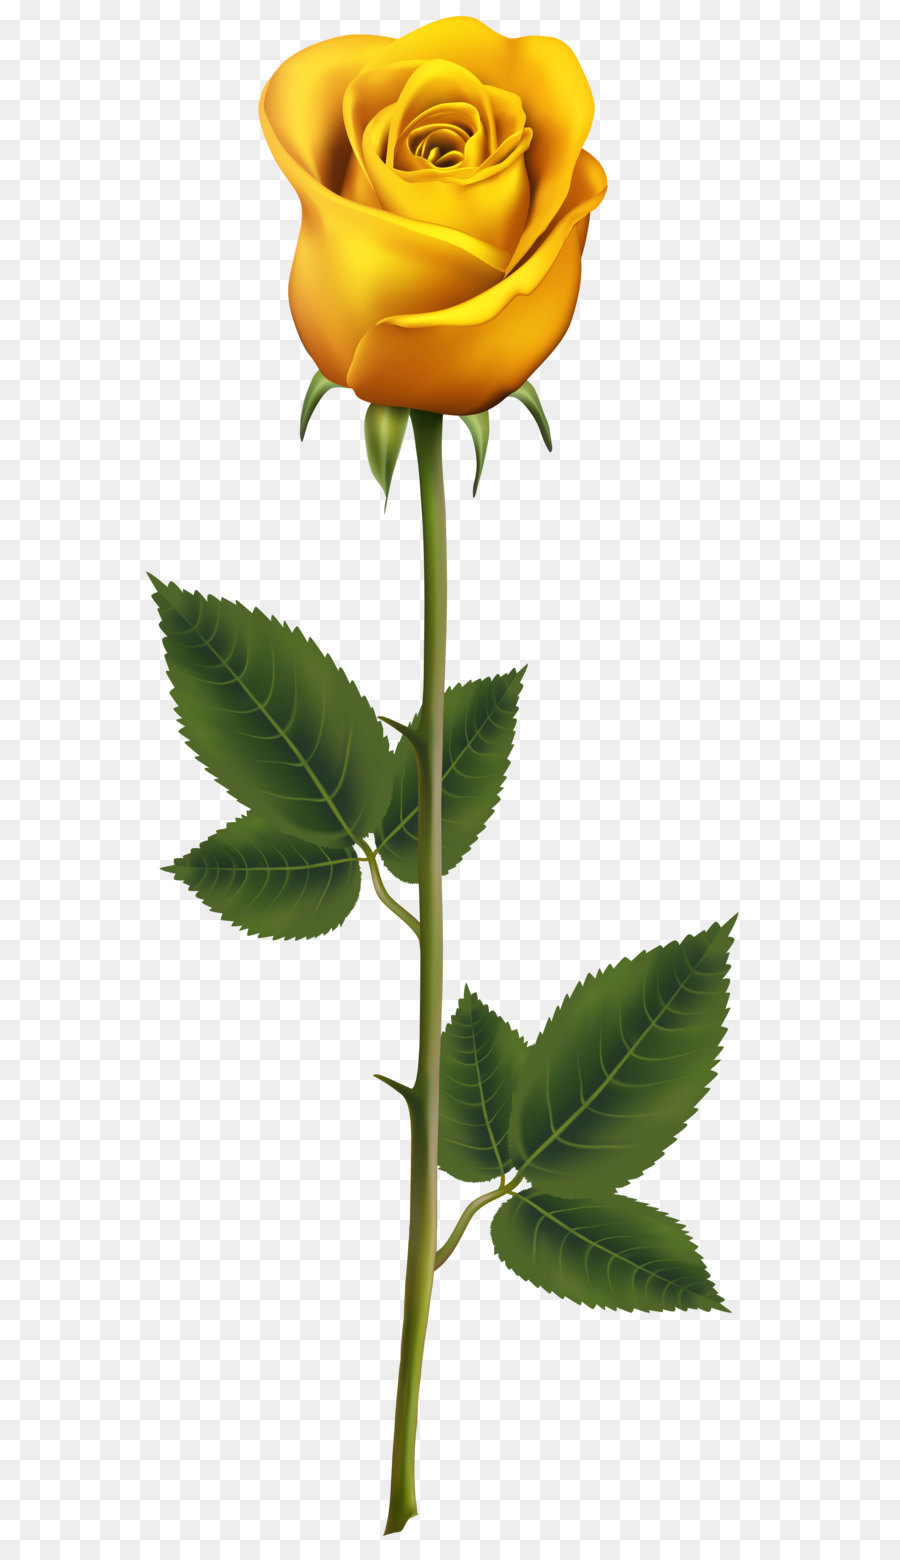 Garden roses Cut flowers Bud Plant stem - Yellow Rose with Stem PNG Transparent Clip Art Image png download - 3375*8000 - Free Transparent Blue Rose png Download.